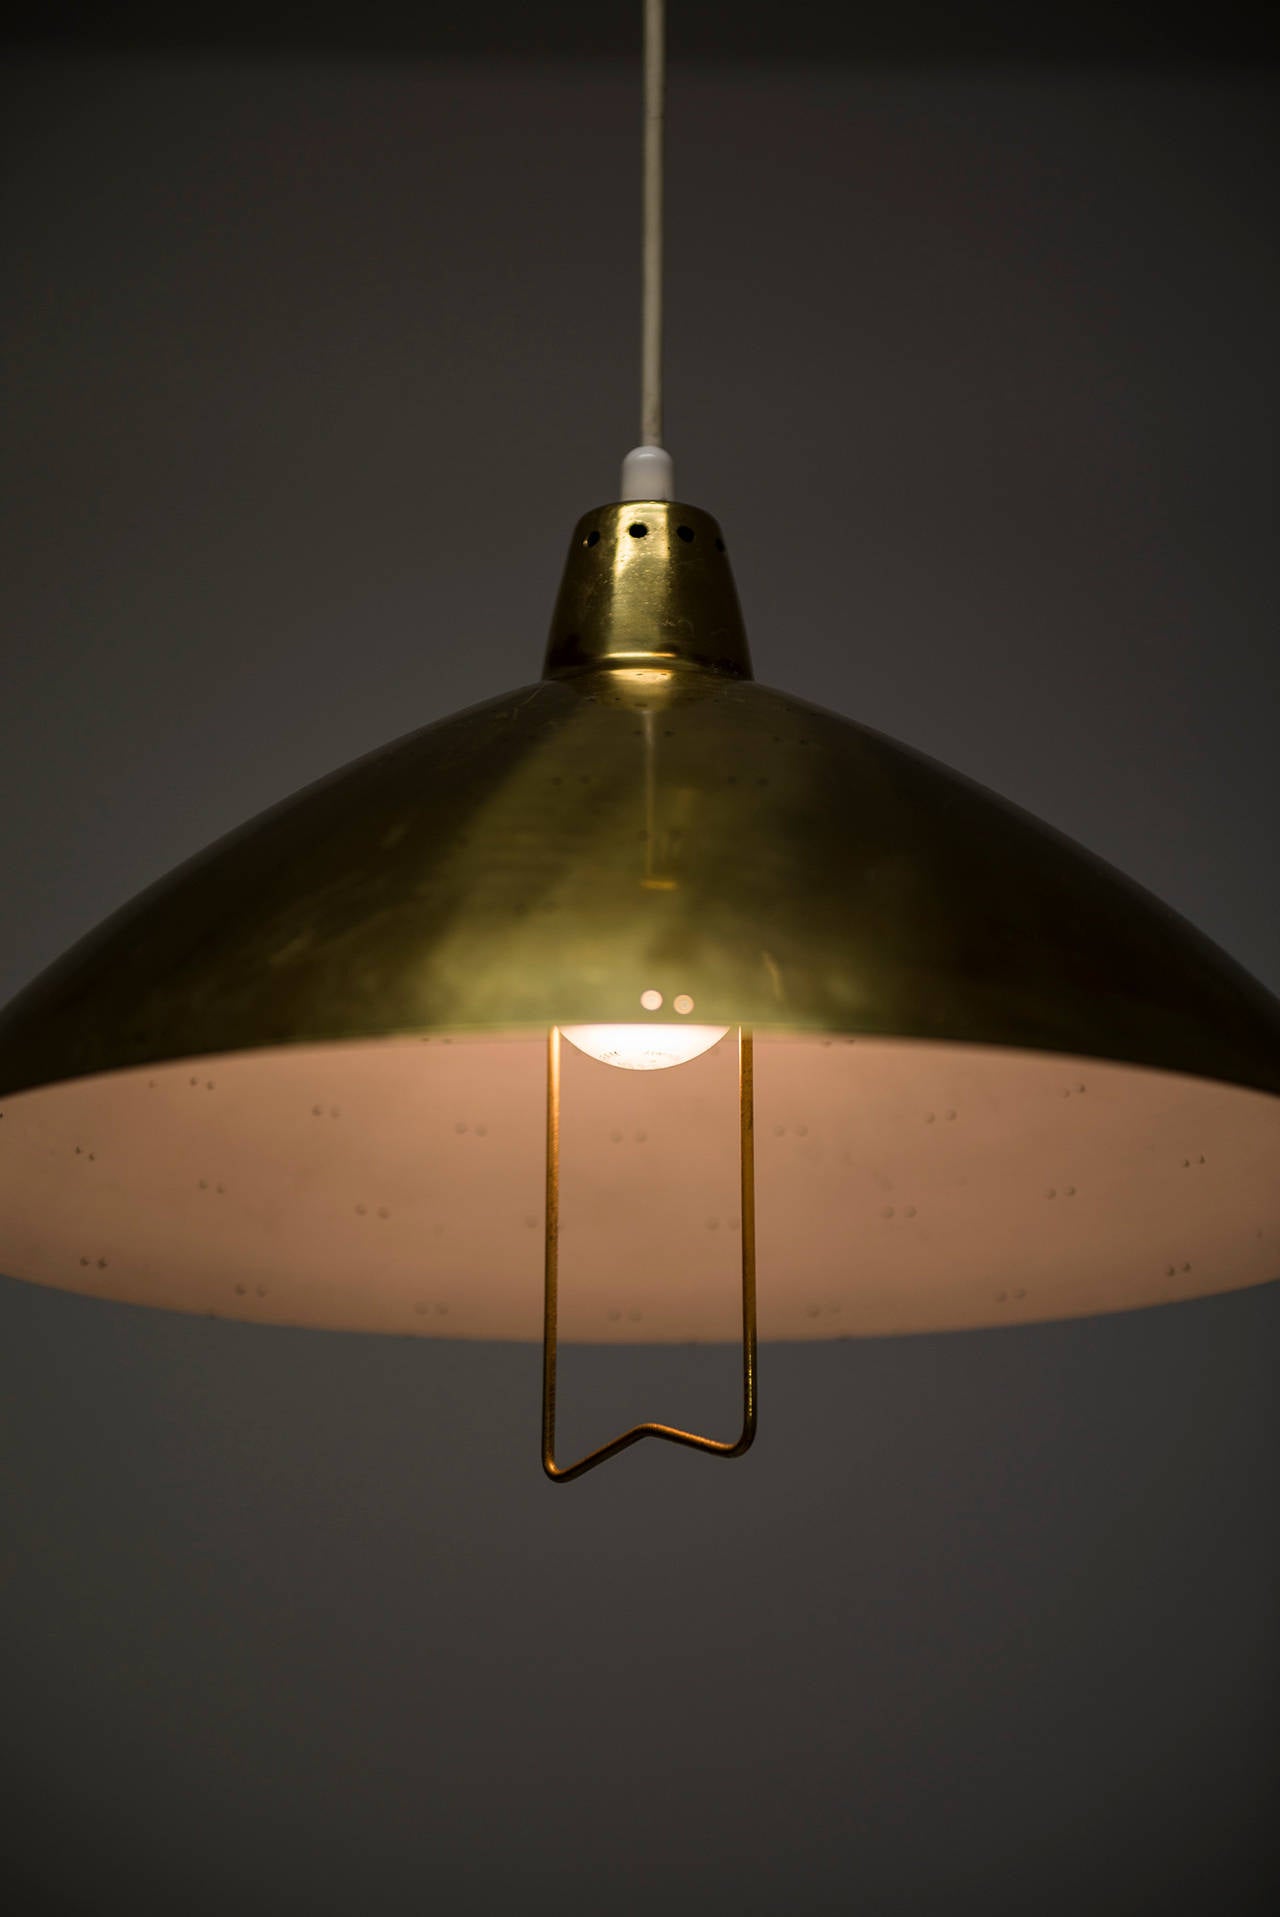 counter weight lamp